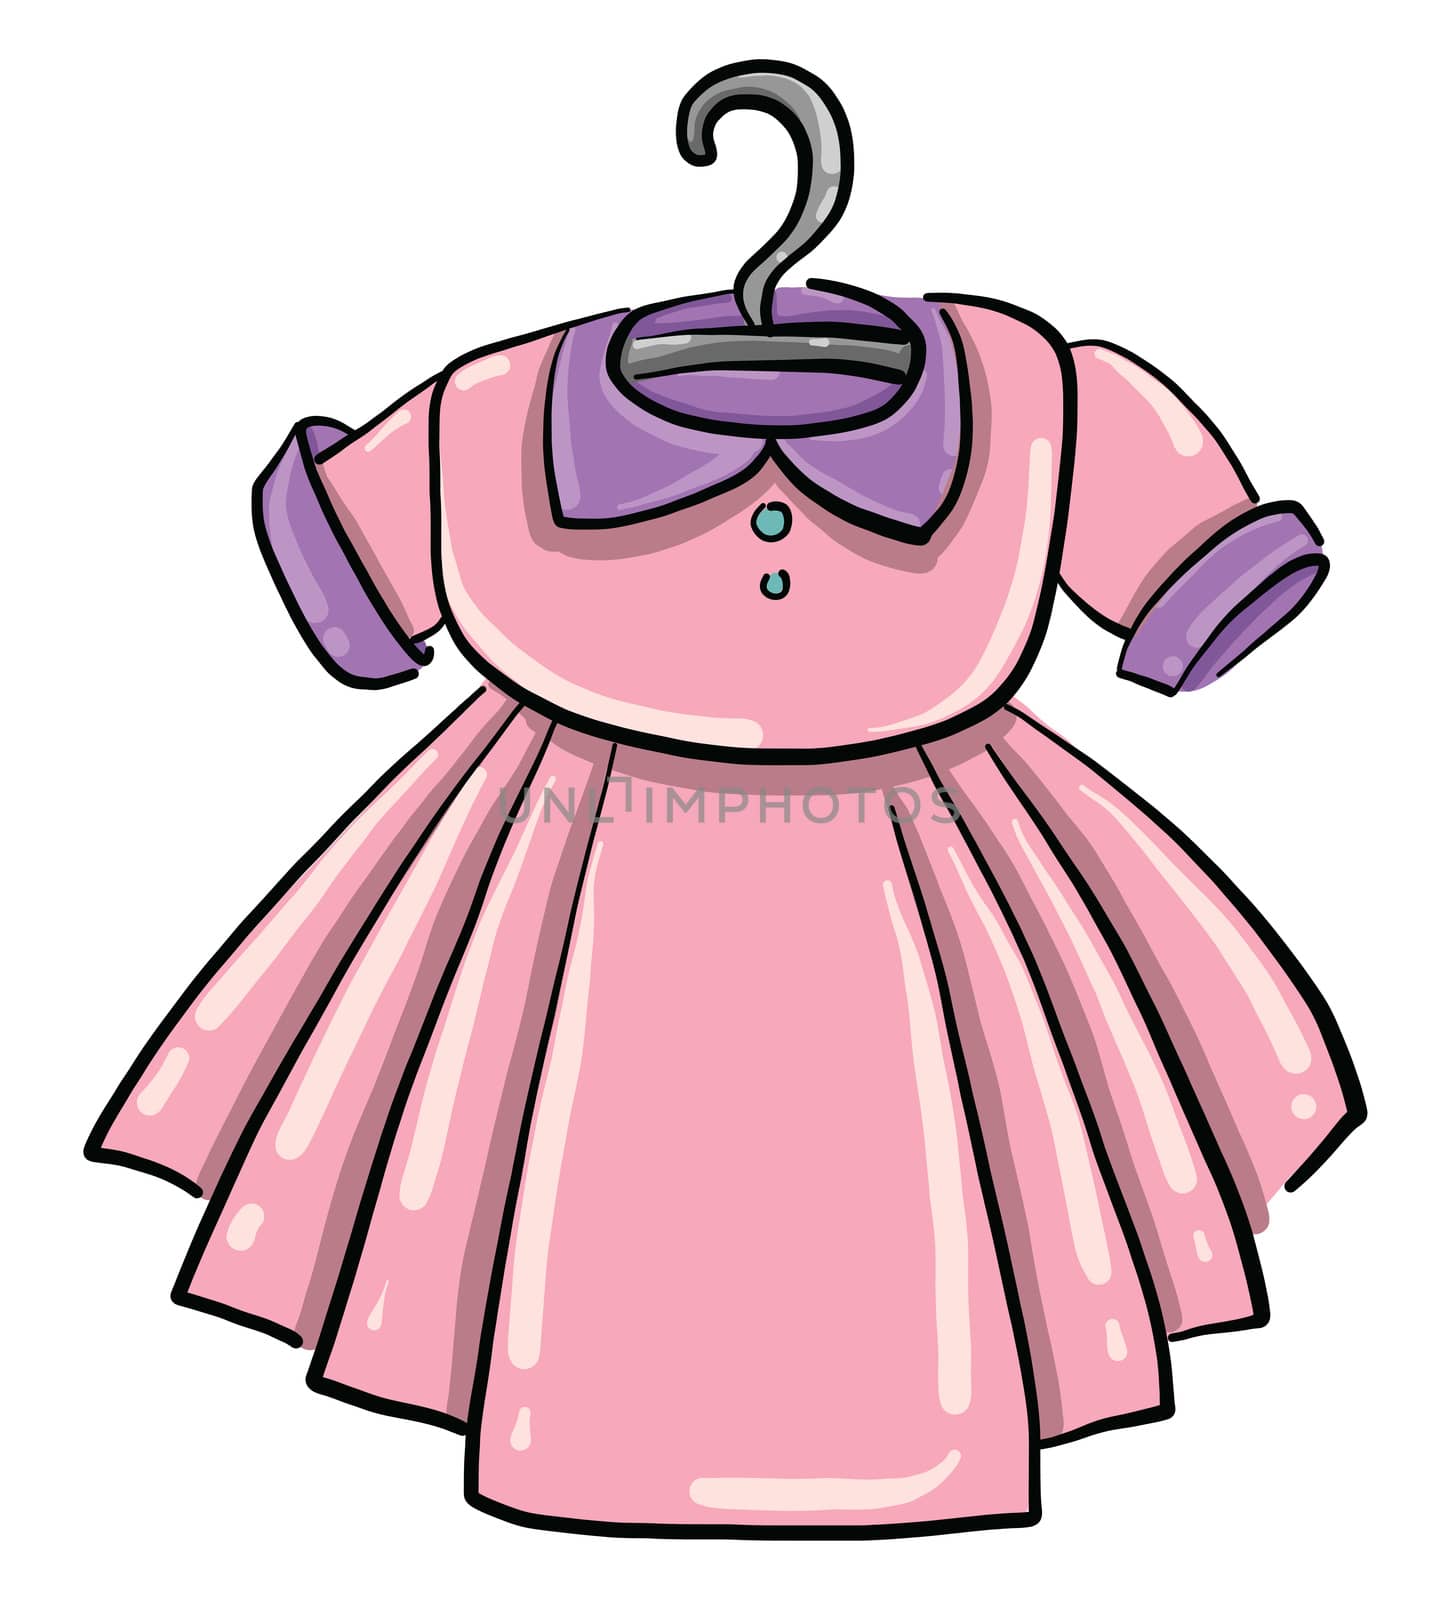 Cute pink dress , illustration, vector on white background